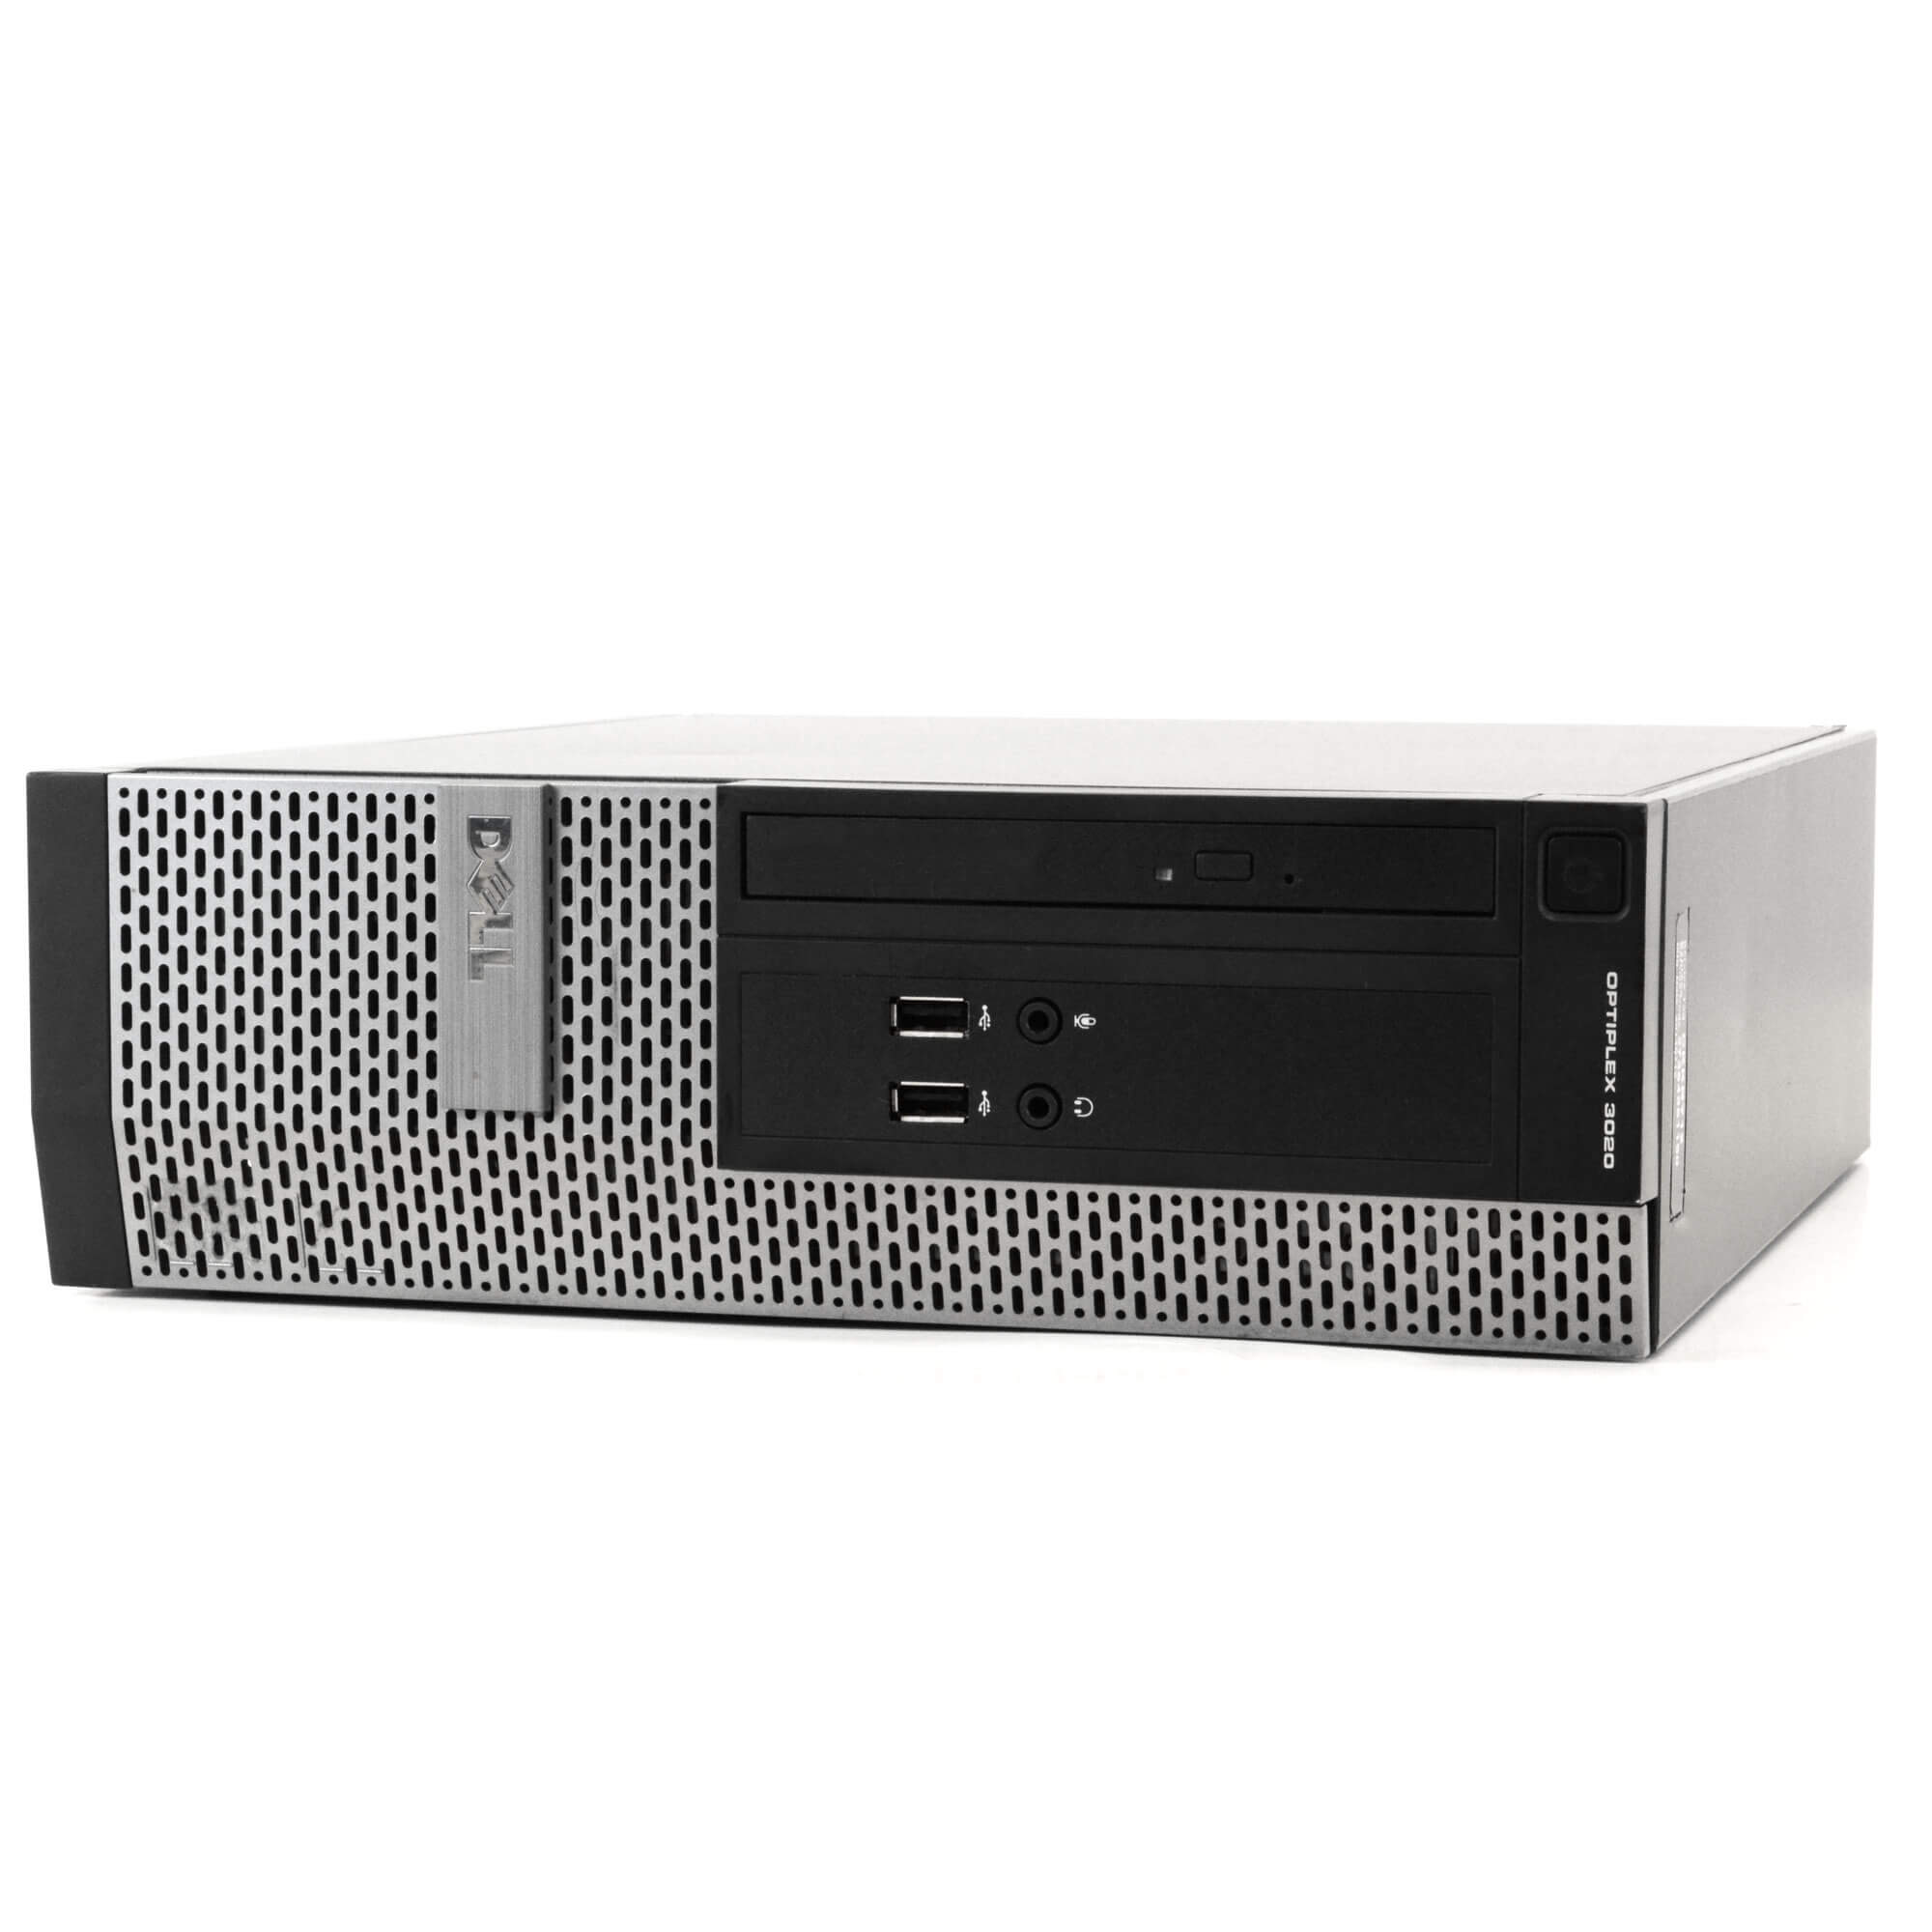 Restored Dell OptiPlex 3020 Desktop Computer PC, Intel Quad-Core i5, 1TB HDD, 8GB DDR3 RAM, Windows 10 Home, DVD, WIFI, 19in Monitor, USB Keyboard and Mouse (Refurbished) - image 2 of 8